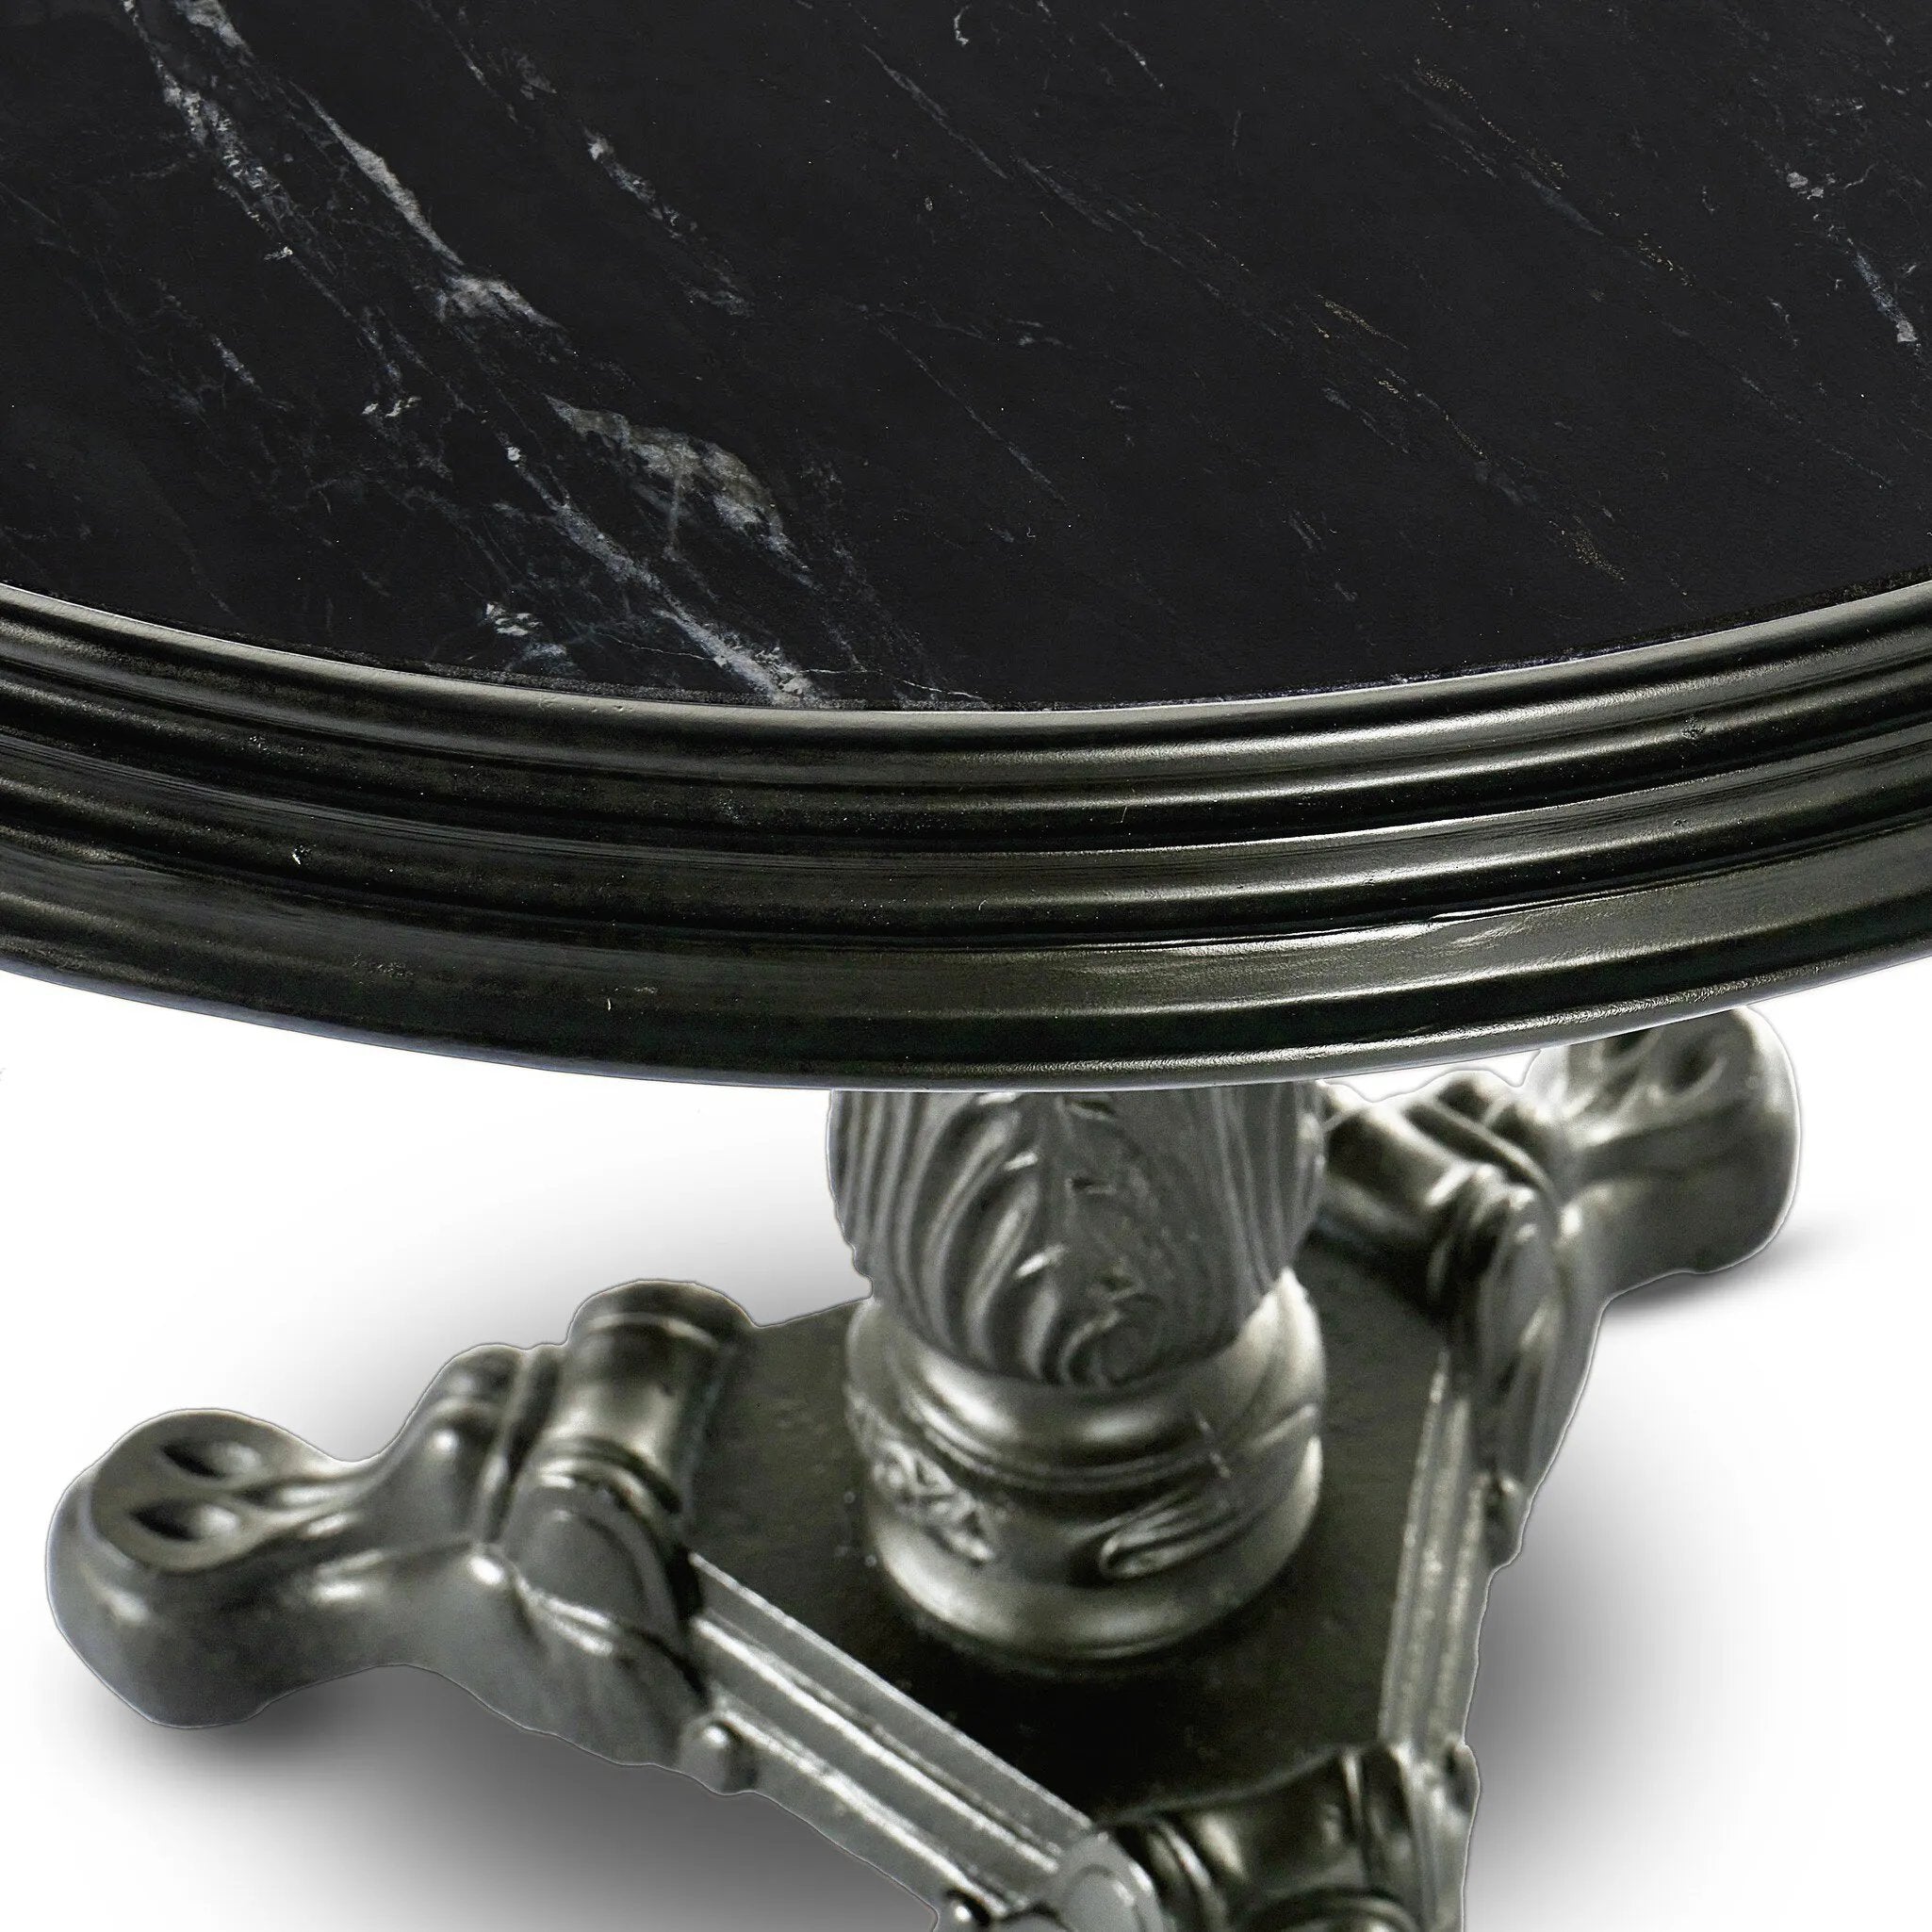 For a fresh take on classic Parisian styling, an ornate cast iron base is topped with black marble.Collection: Rockwel Amethyst Home provides interior design, new home construction design consulting, vintage area rugs, and lighting in the Los Angeles metro area.